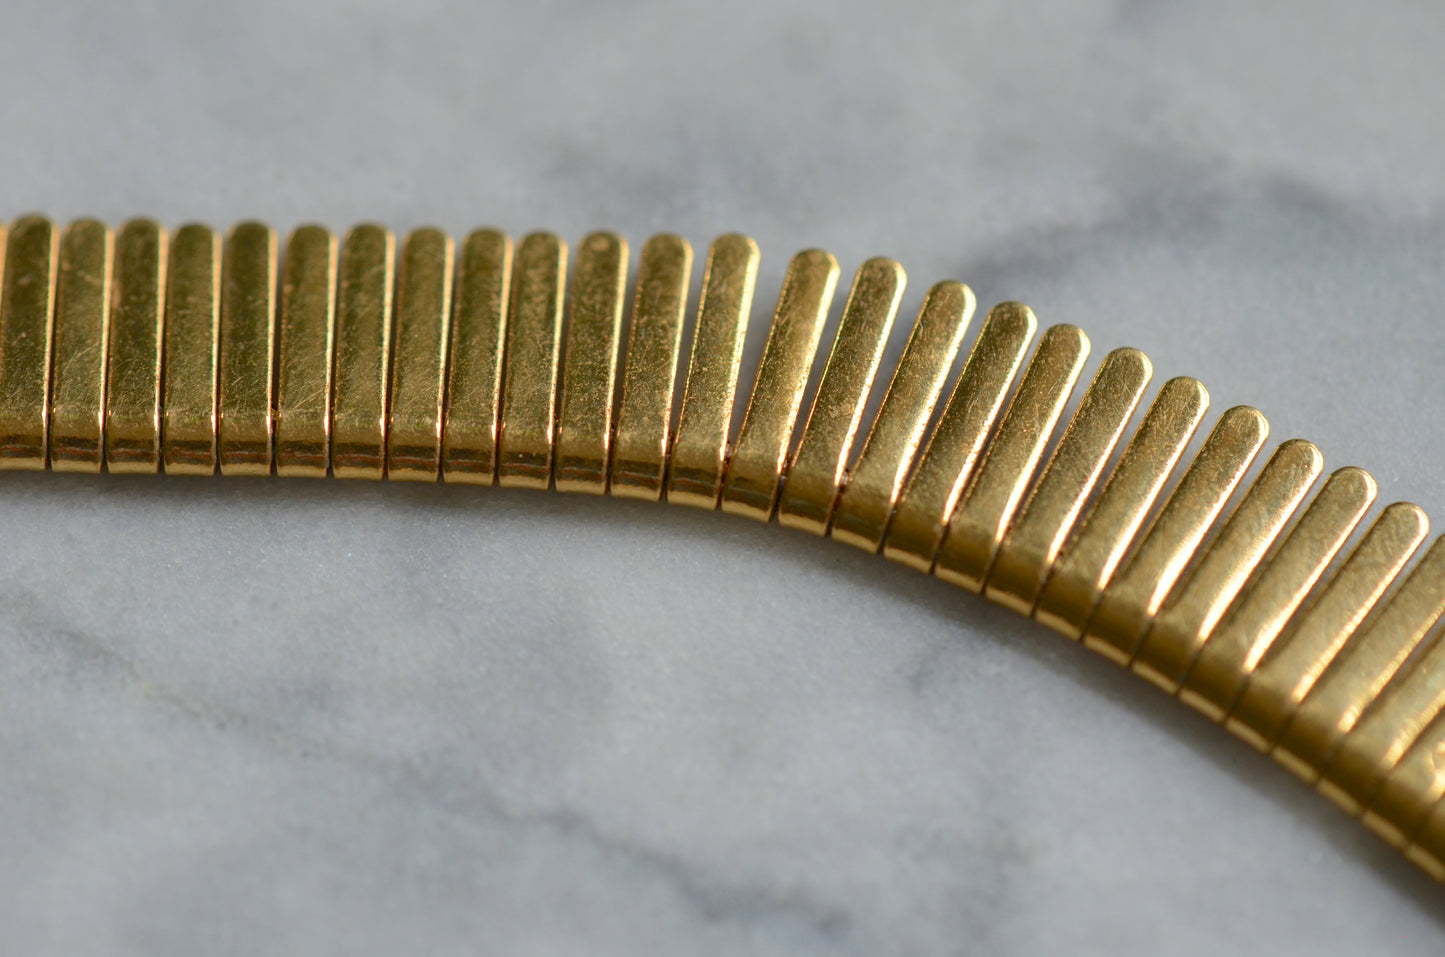 Signed Mid-Century Egyptian Revival Collar